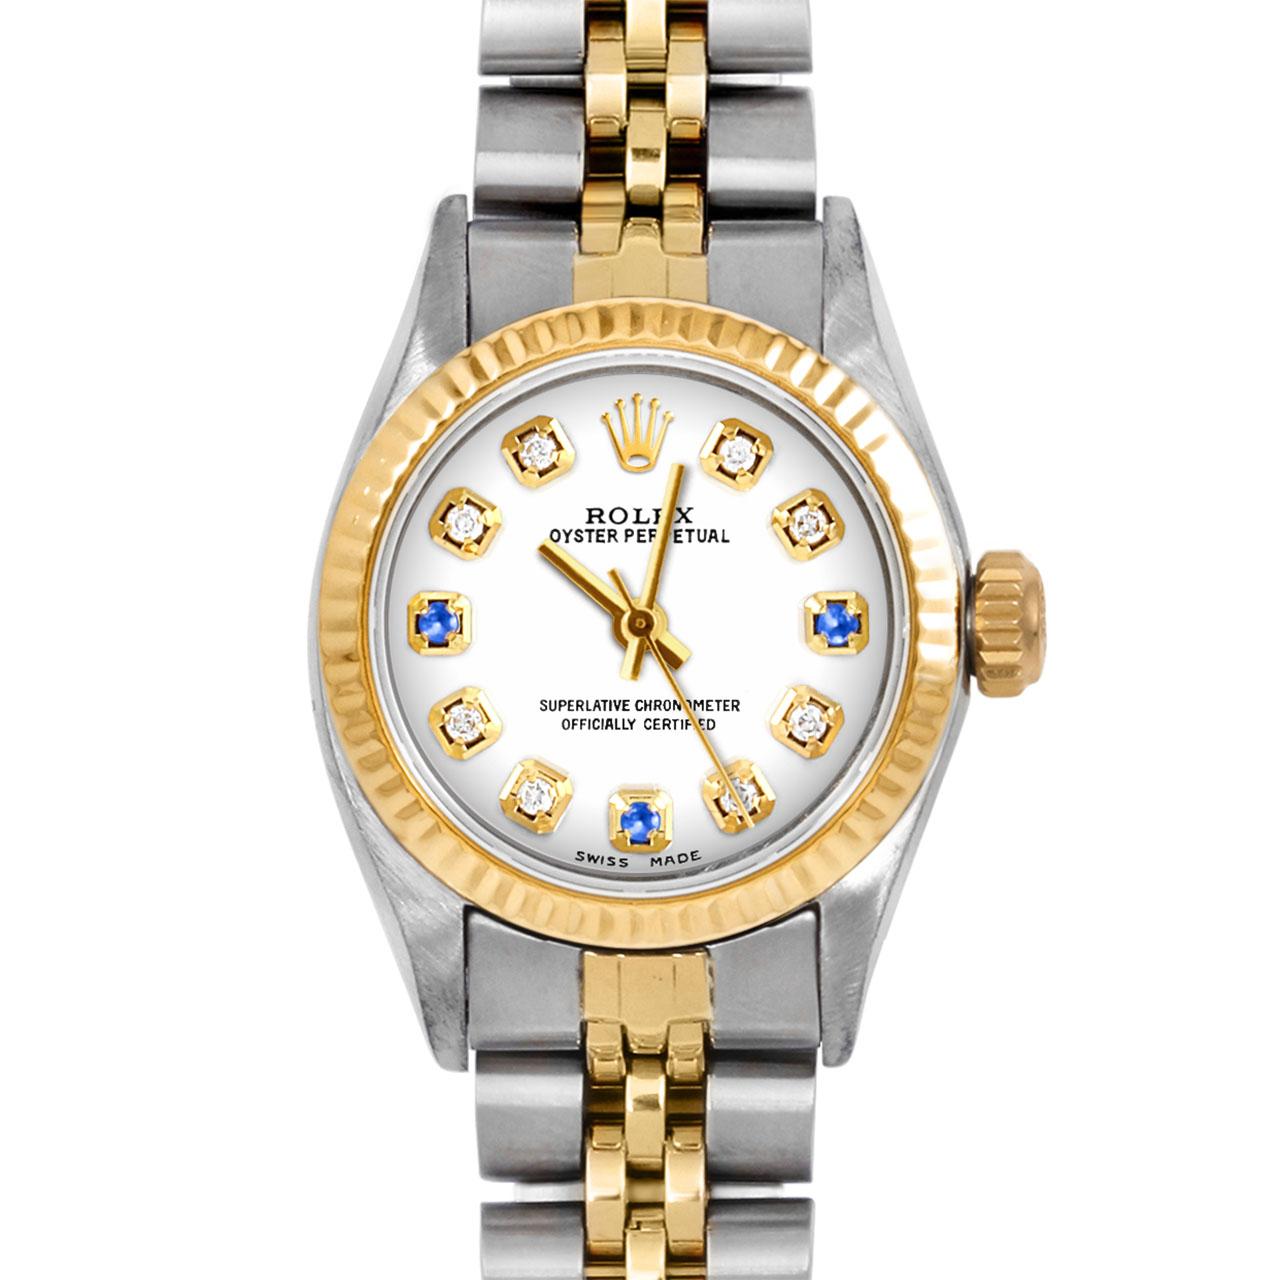 Brand : Rolex
Model : Oyster Perpetual 
Gender : Ladies
Metals : 14K Yellow Gold / Stainless Steel
Case Size : 24 mm
Dial : Custom Sapphire Diamond Dial (This dial is not original Rolex And has been added aftermarket yet is a beautiful Custom